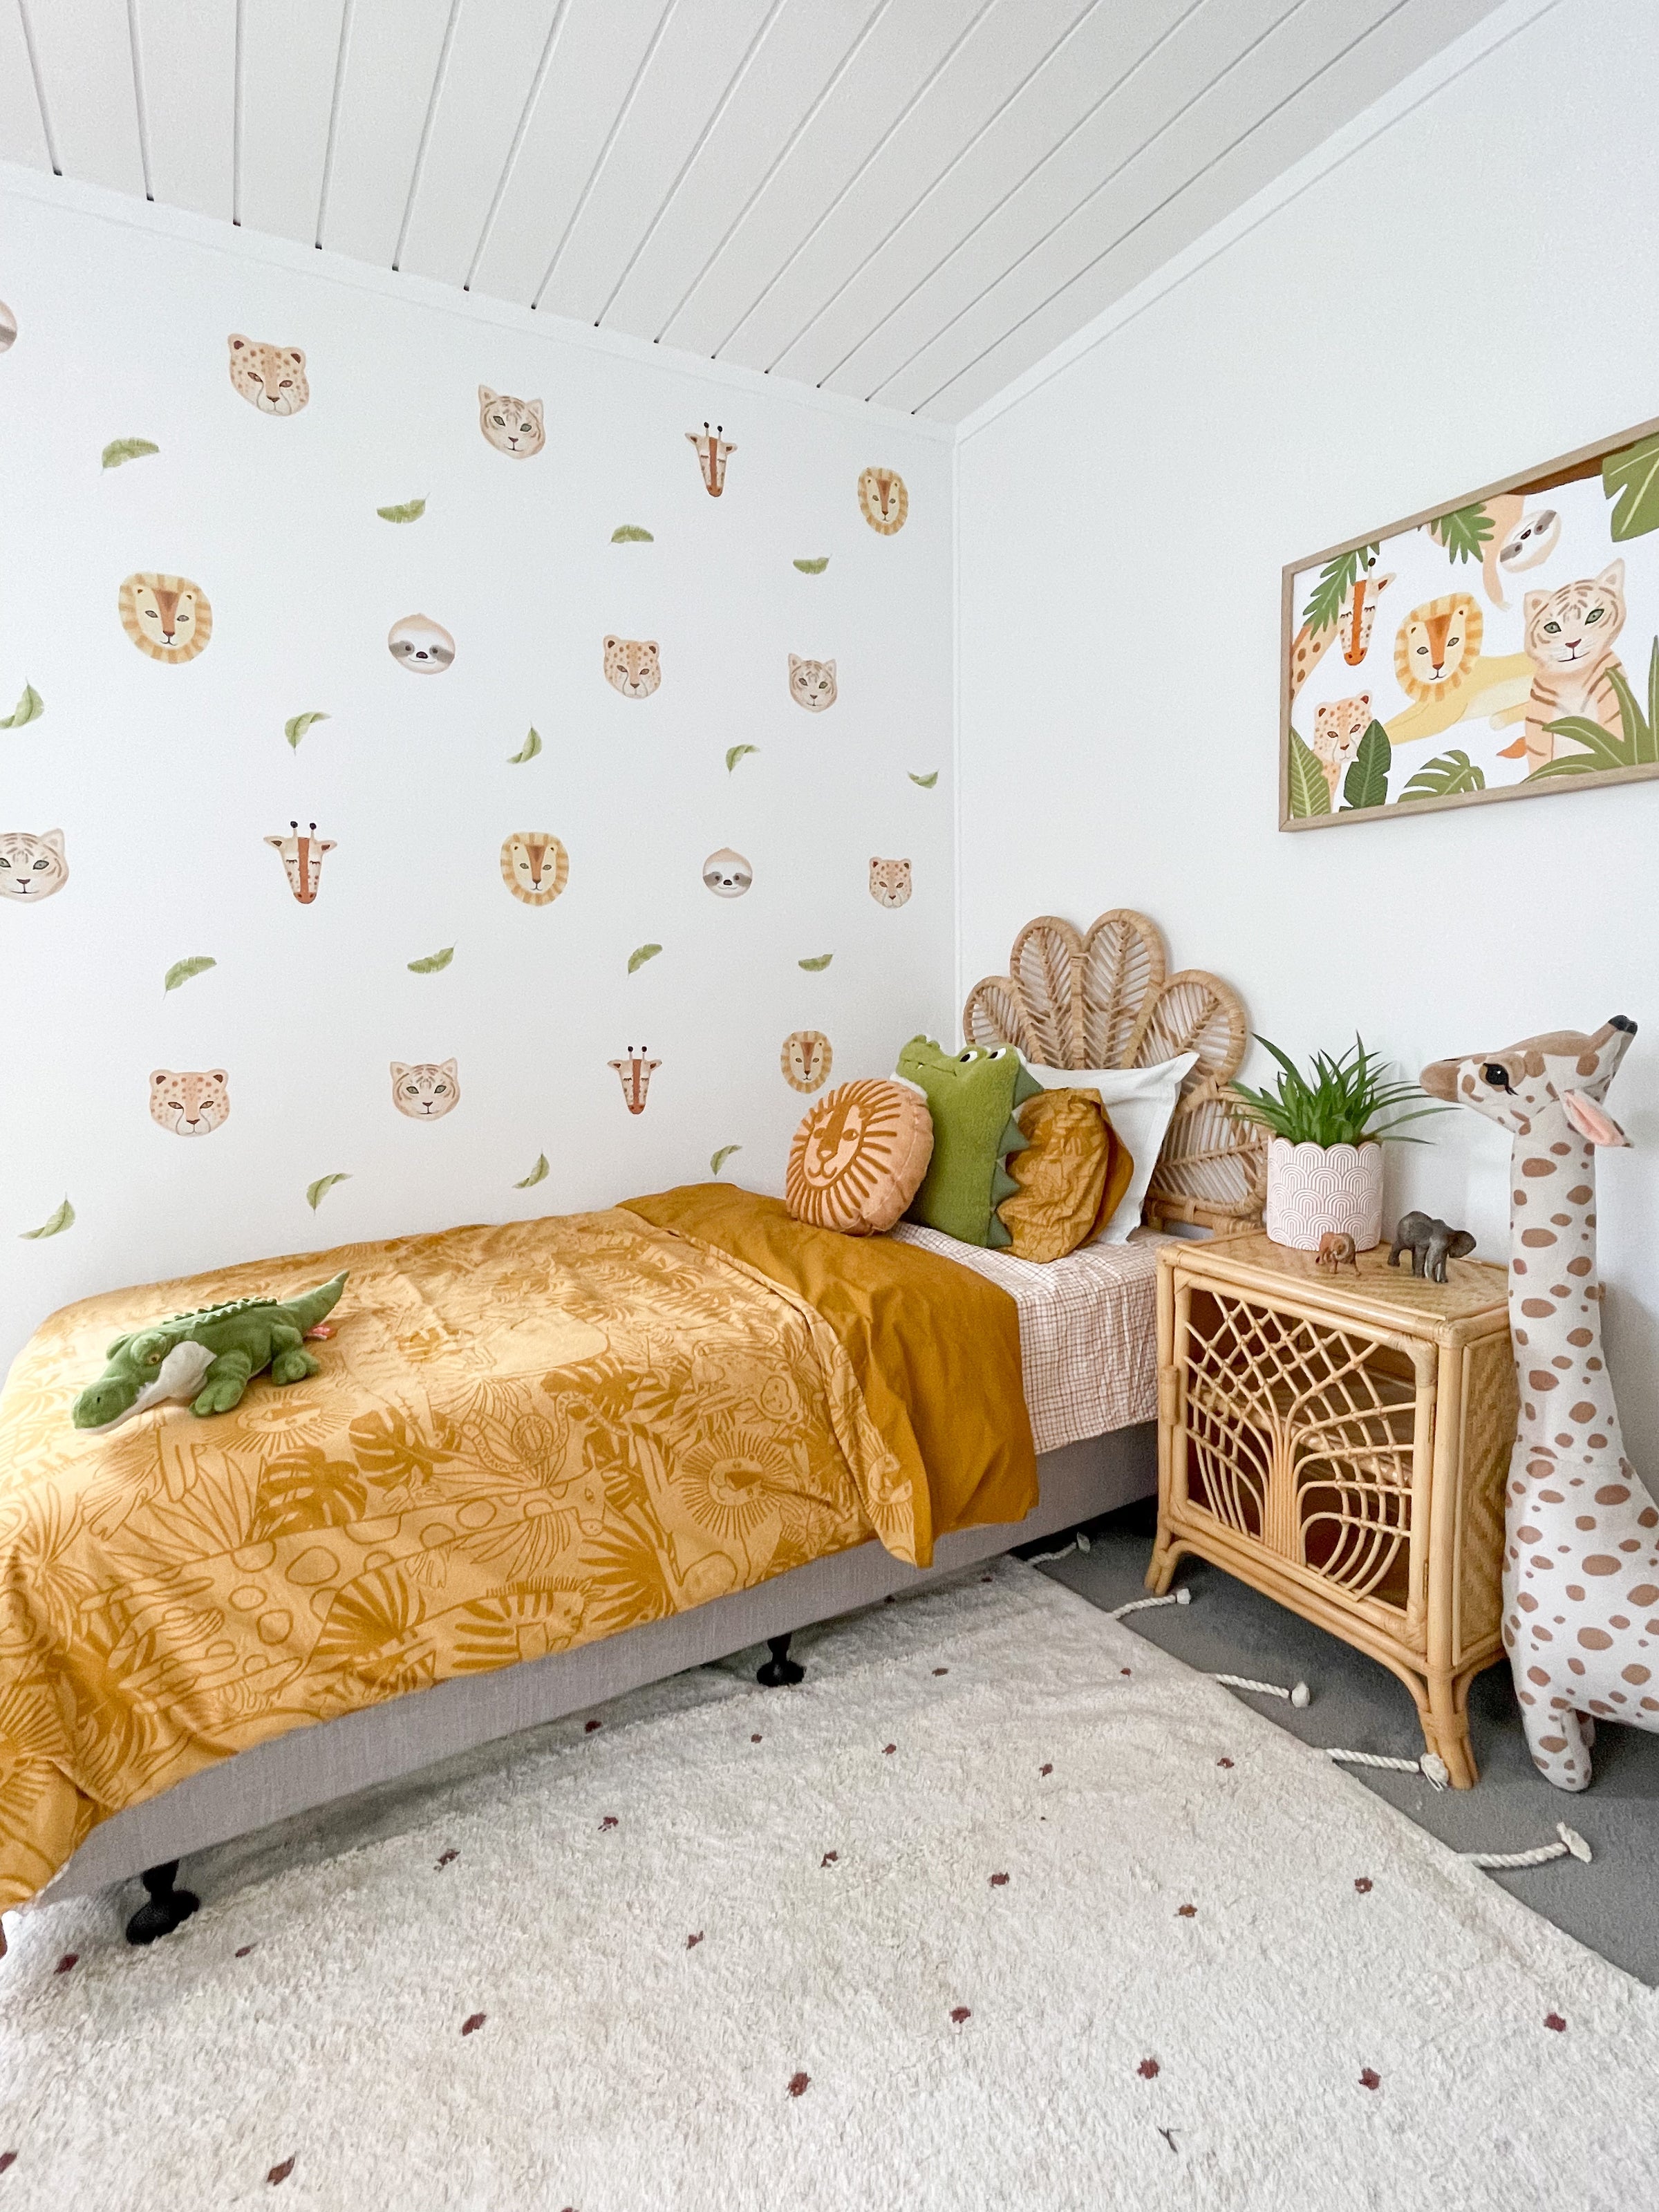 Jungle Leaves - Wall Stickers